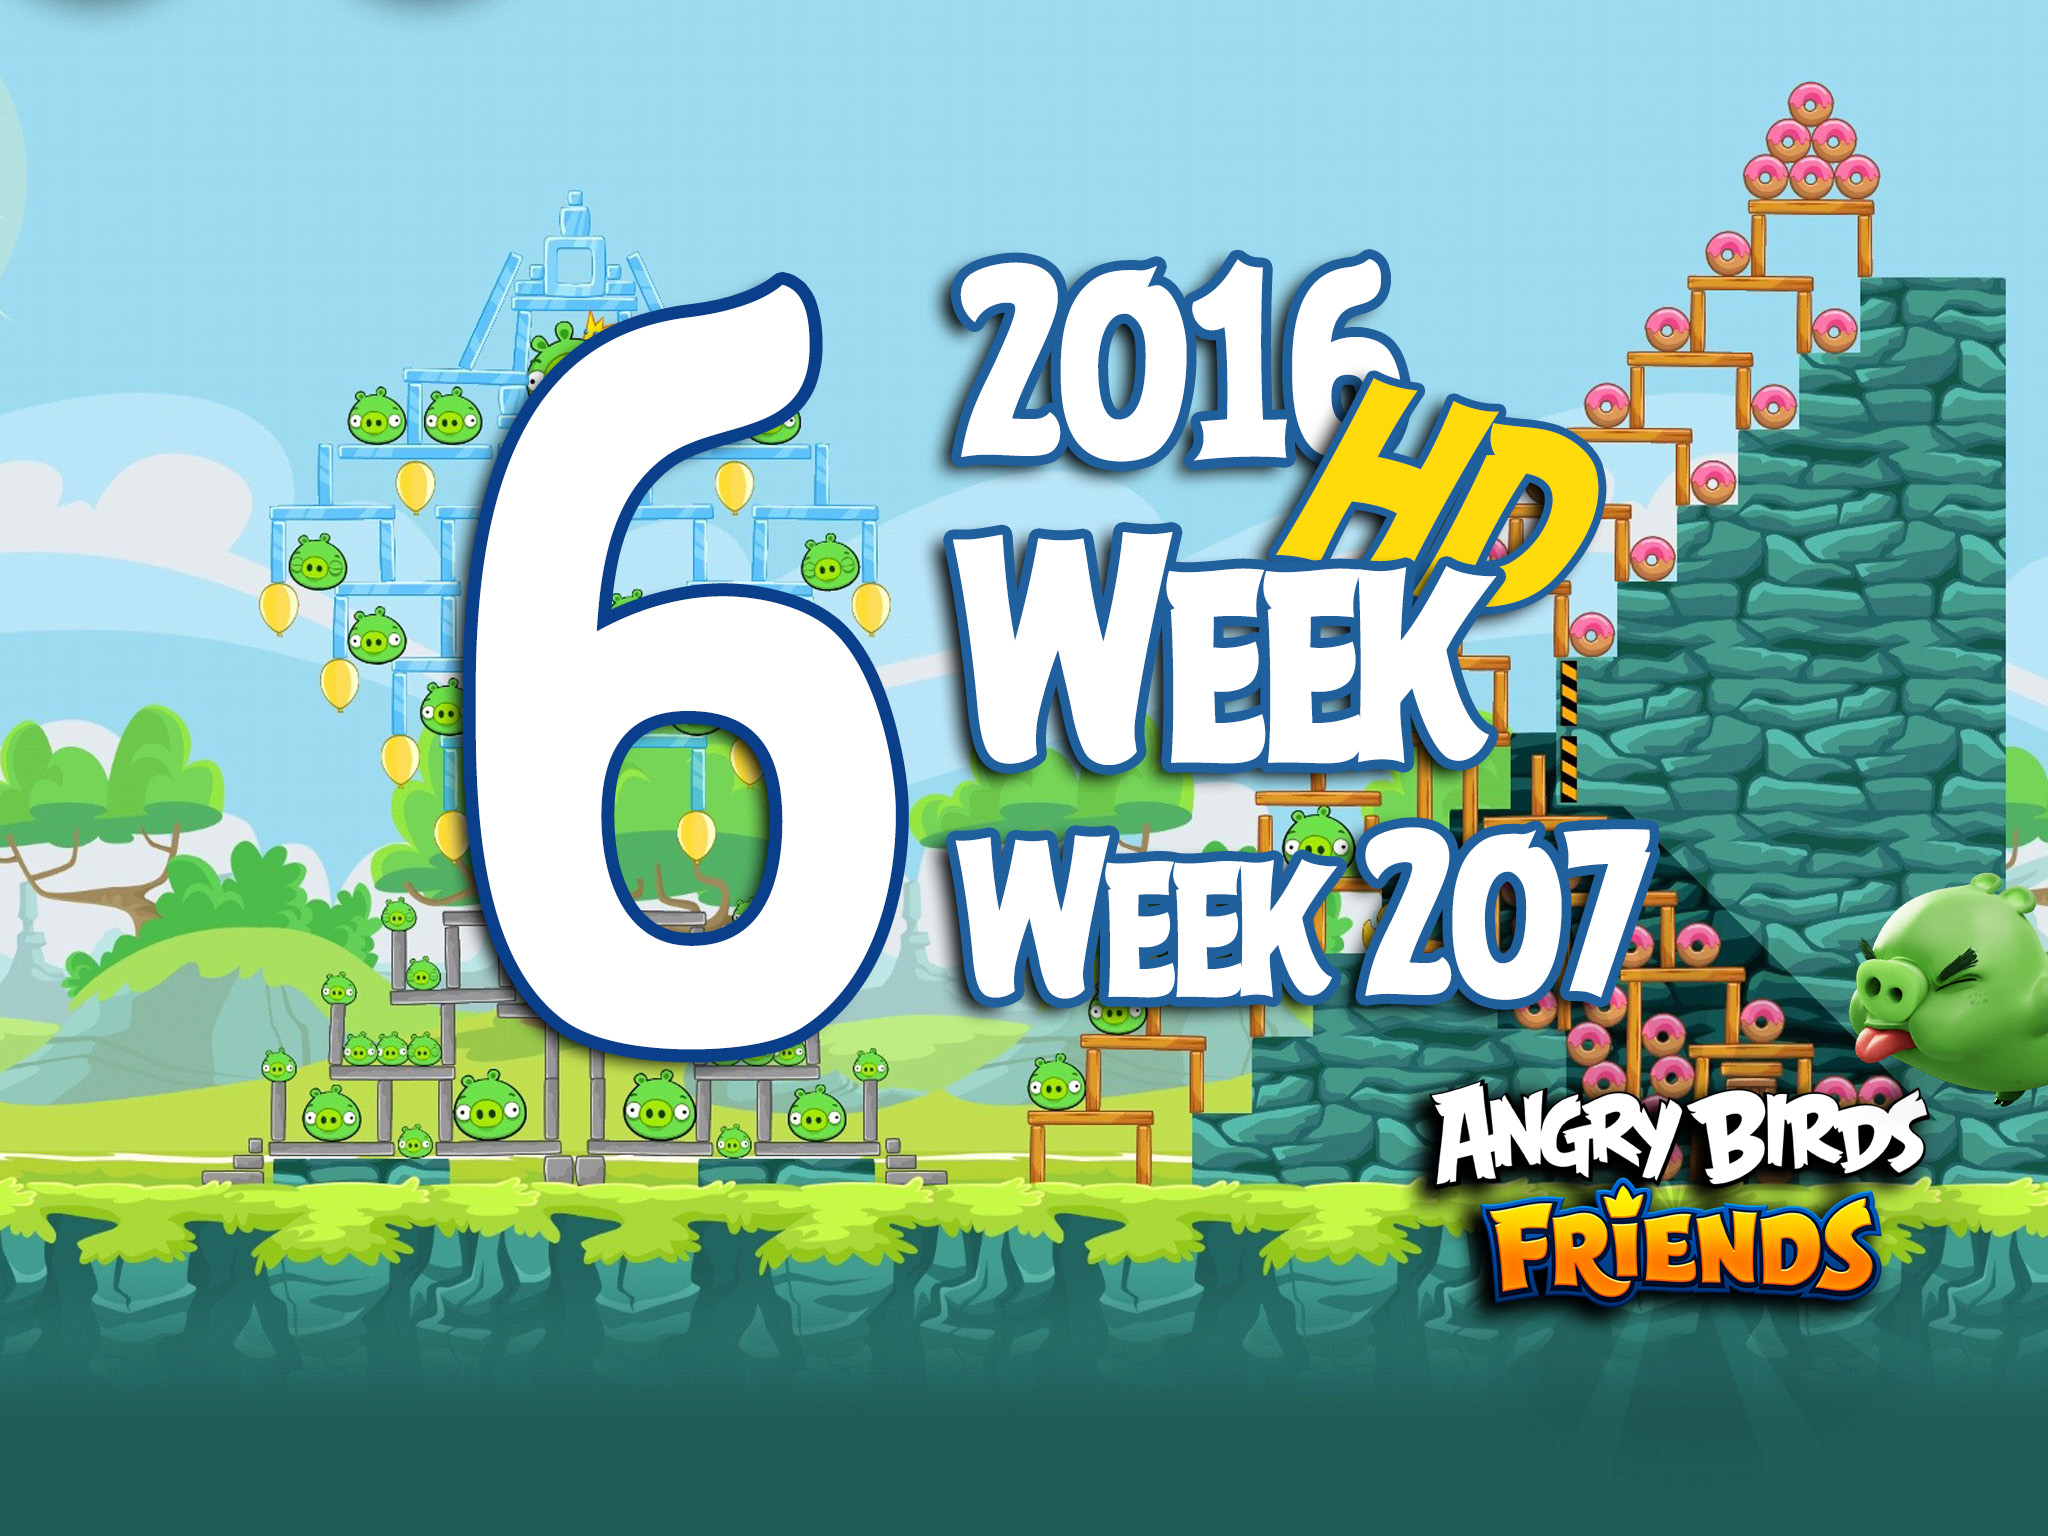 Angry Birds Friends Tournament Level 6 Week 207 Walkthrough | May 5th 2016